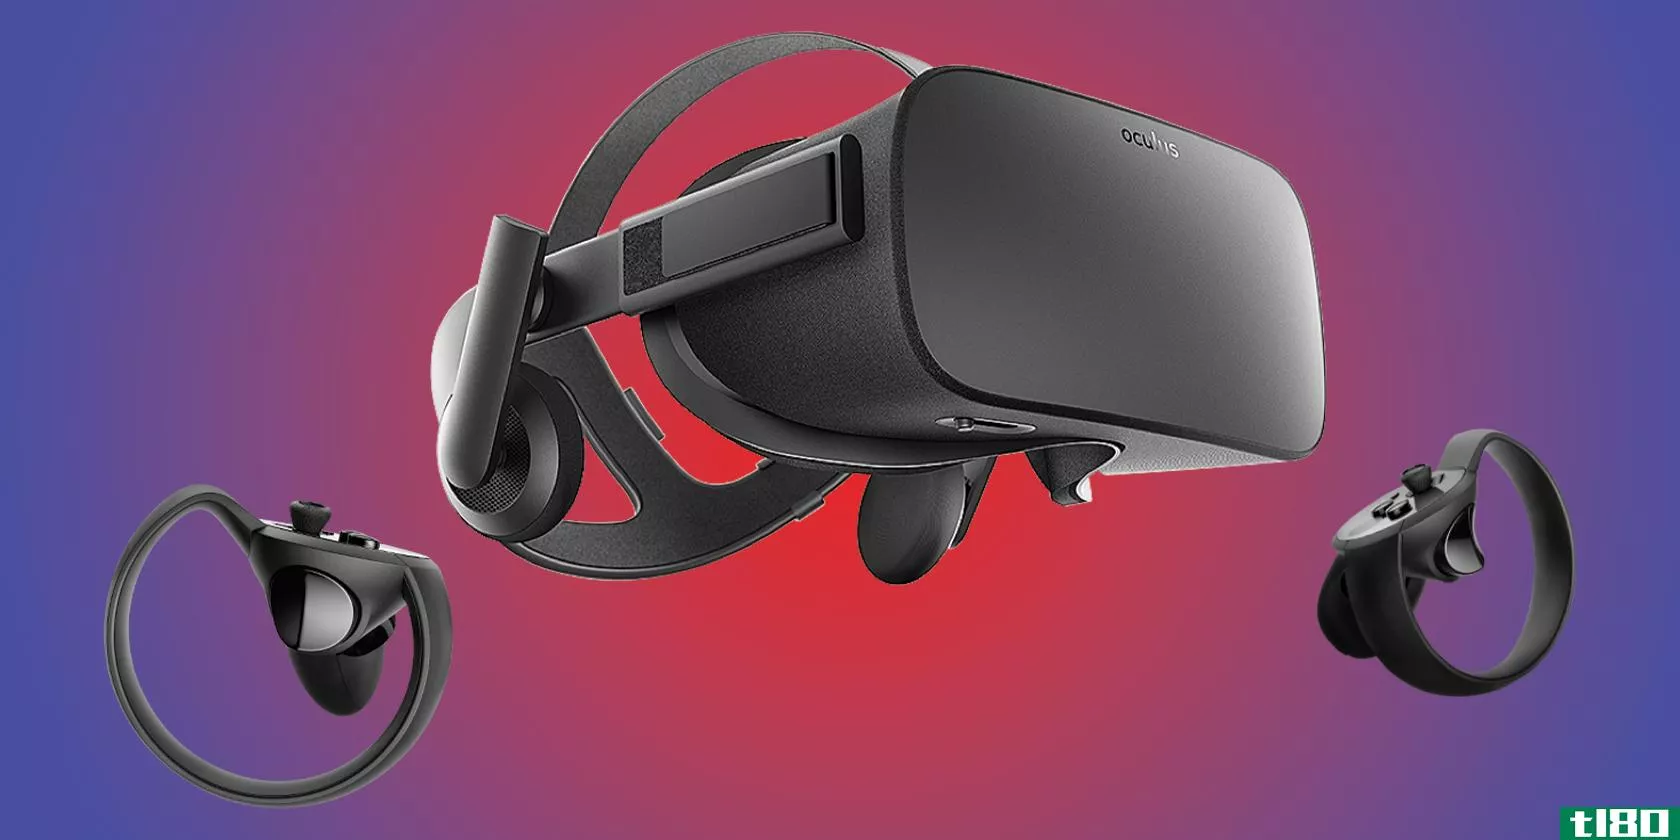 oculus quest headset and hand controls